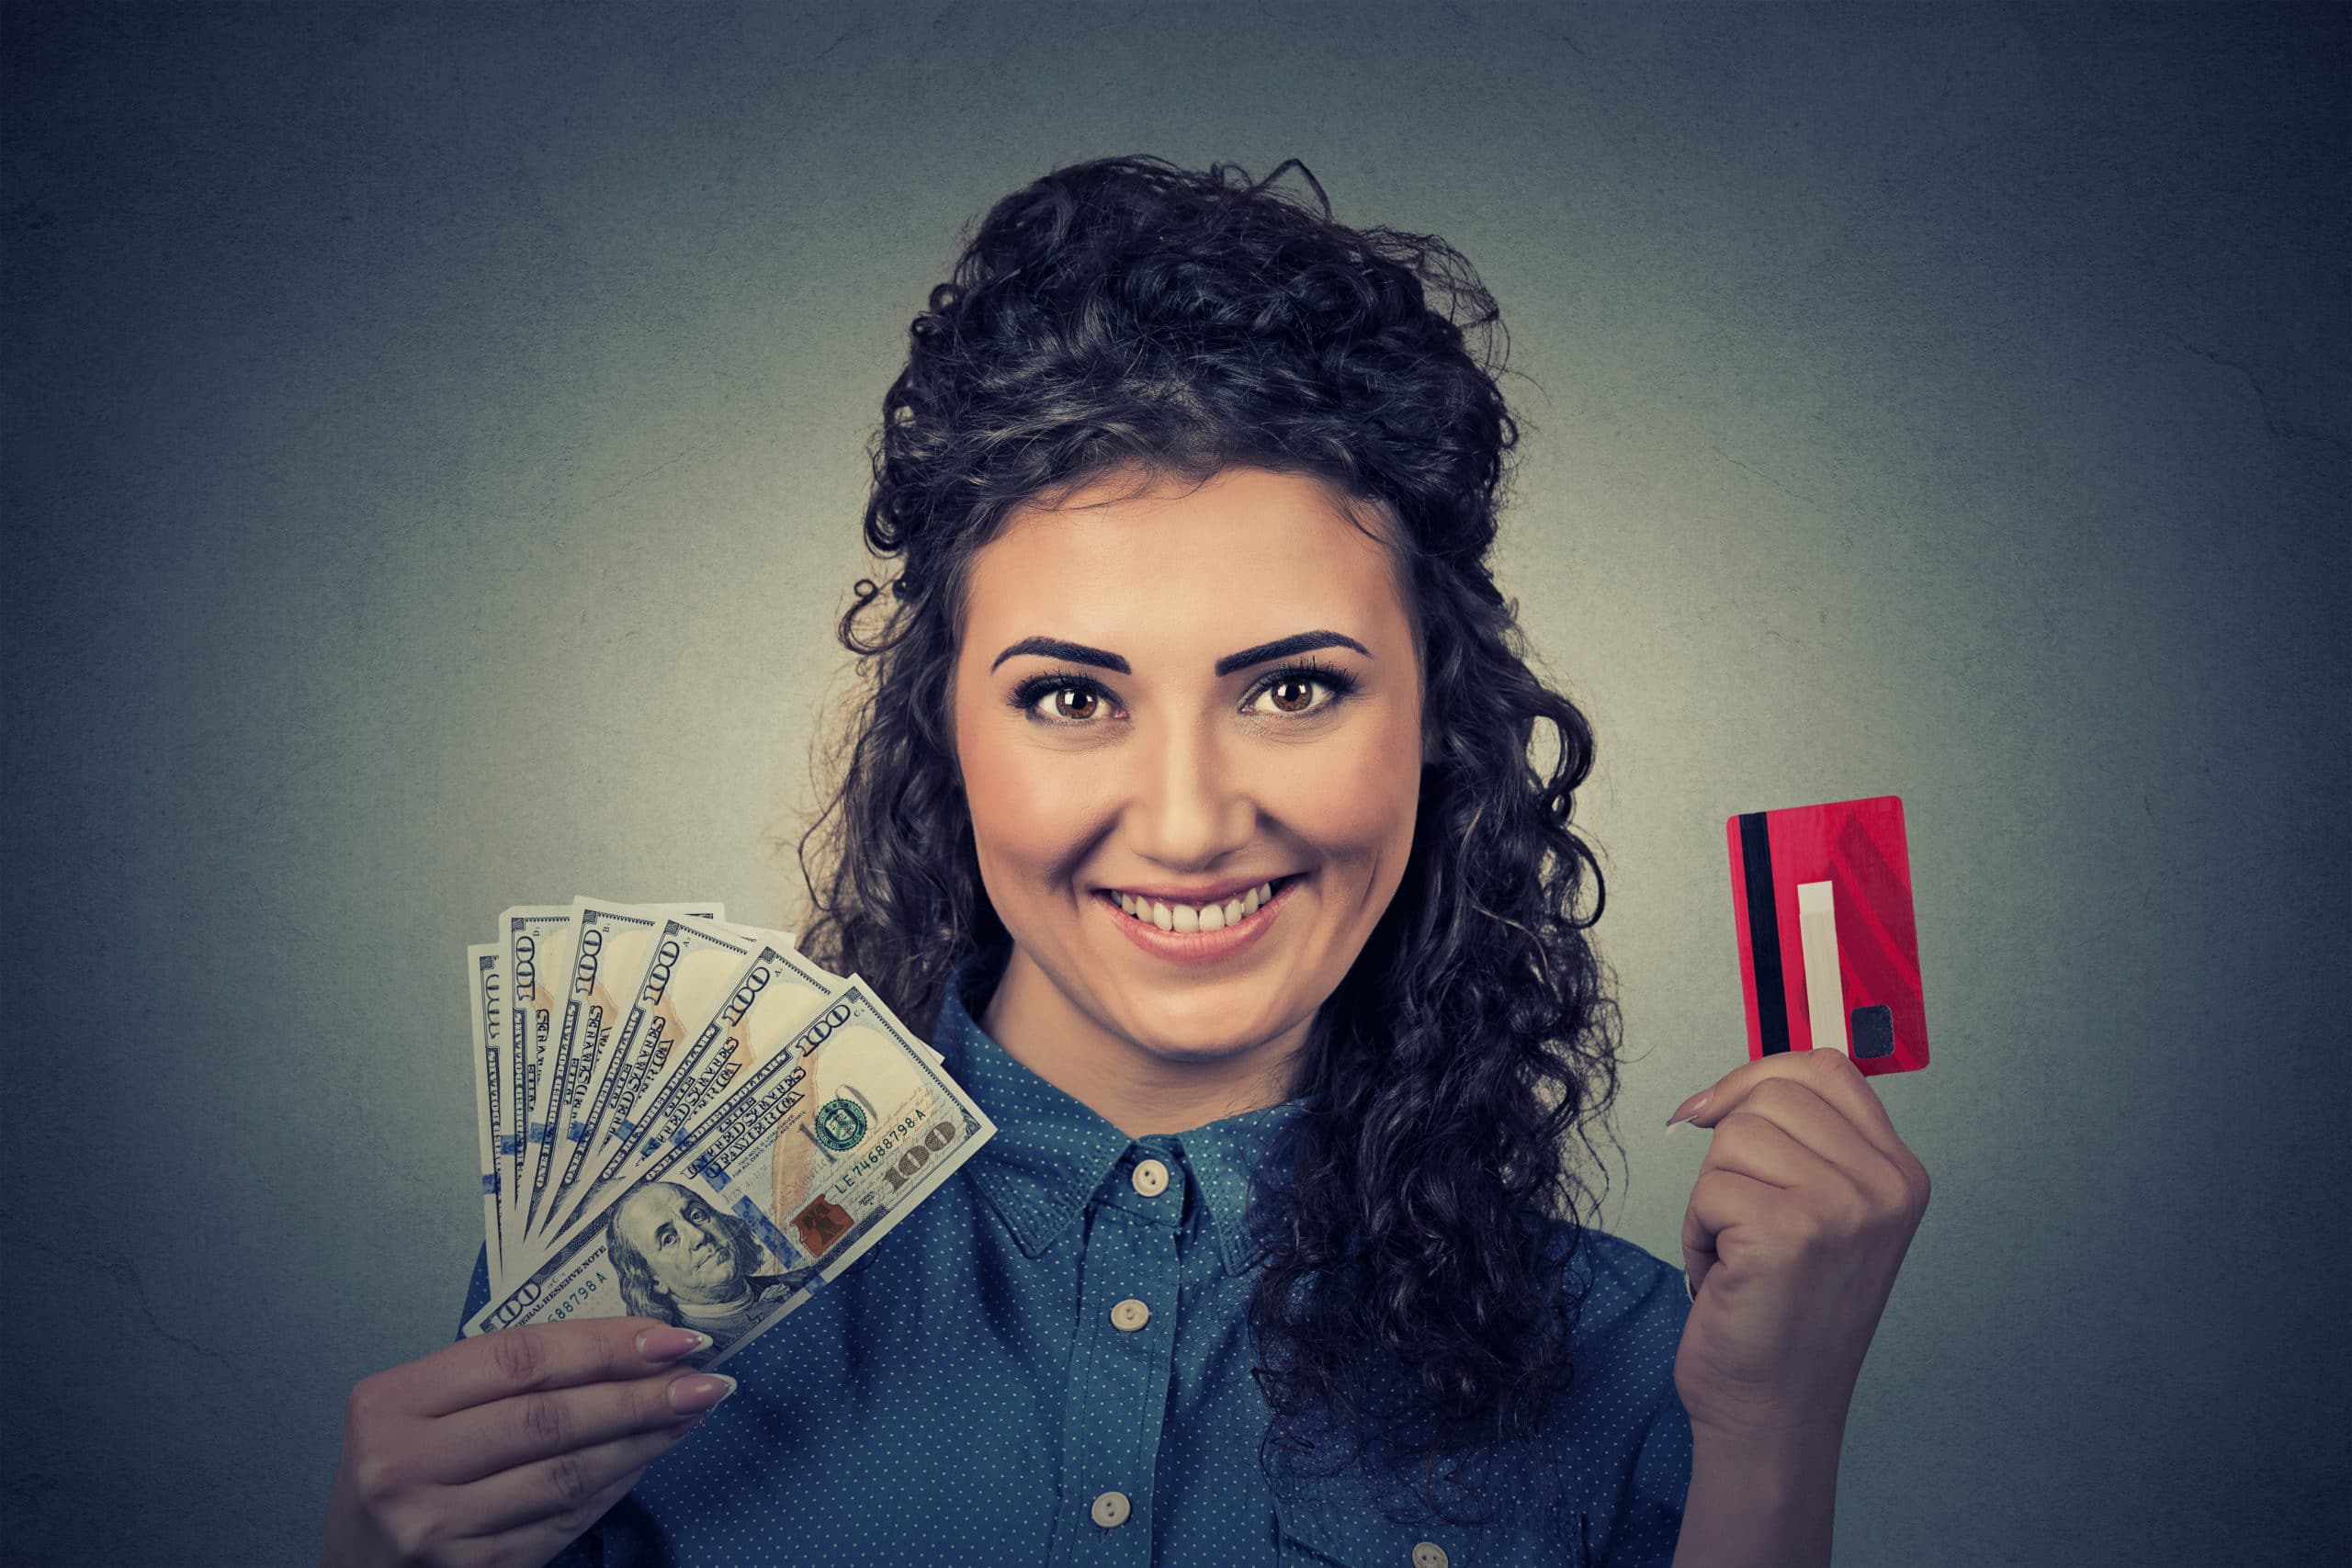 young woman holding showing advance credit card cash